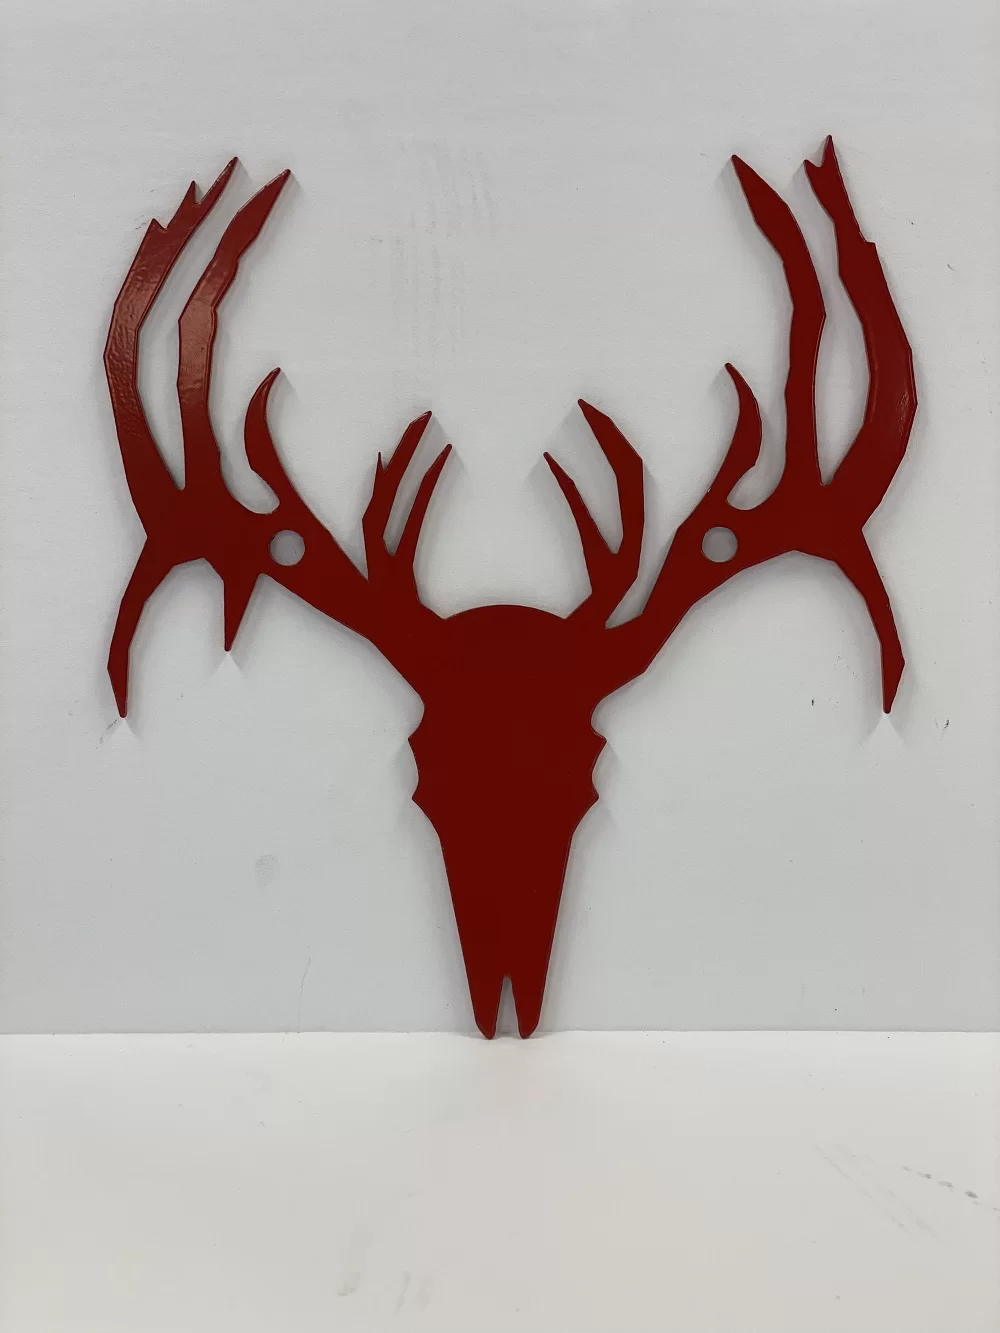 red stag logo